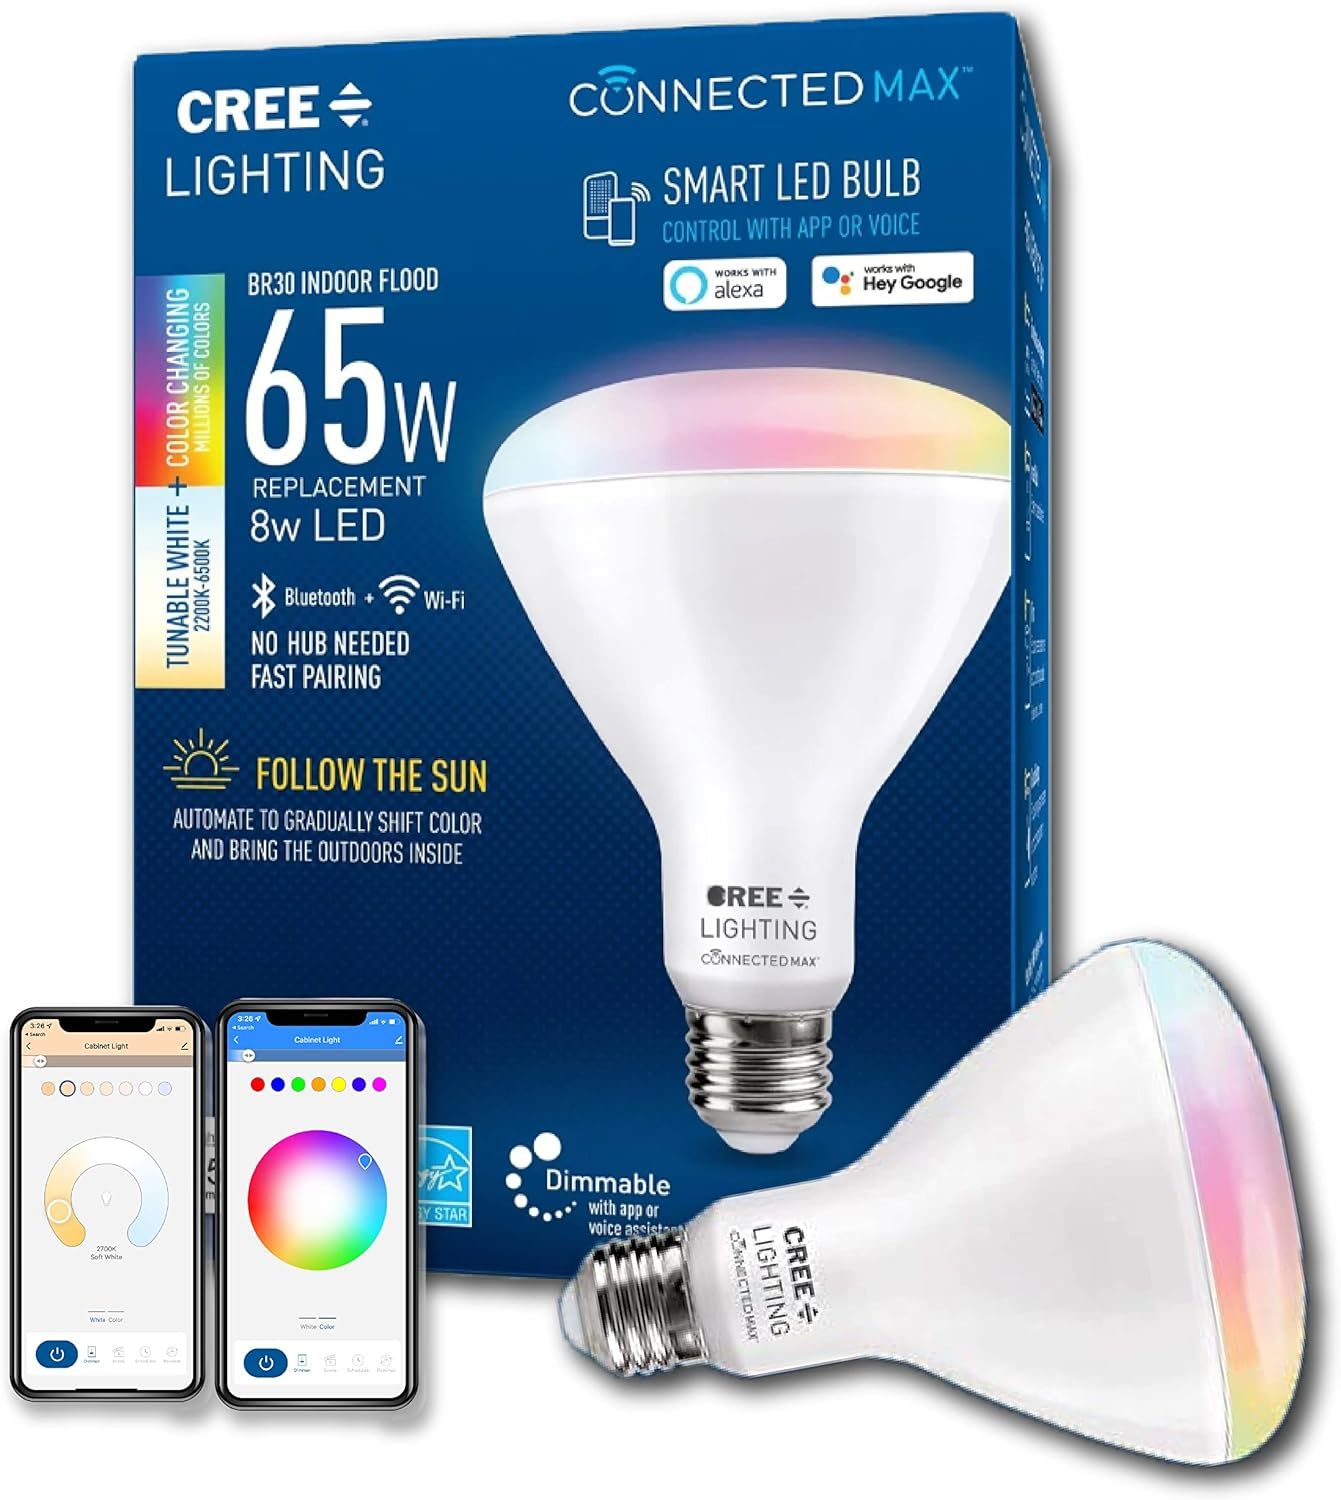 Cree Lighting Connected Max Smart Led Bulb Br30 Indoor Flood Tunable White, 1Pk. - $17.99